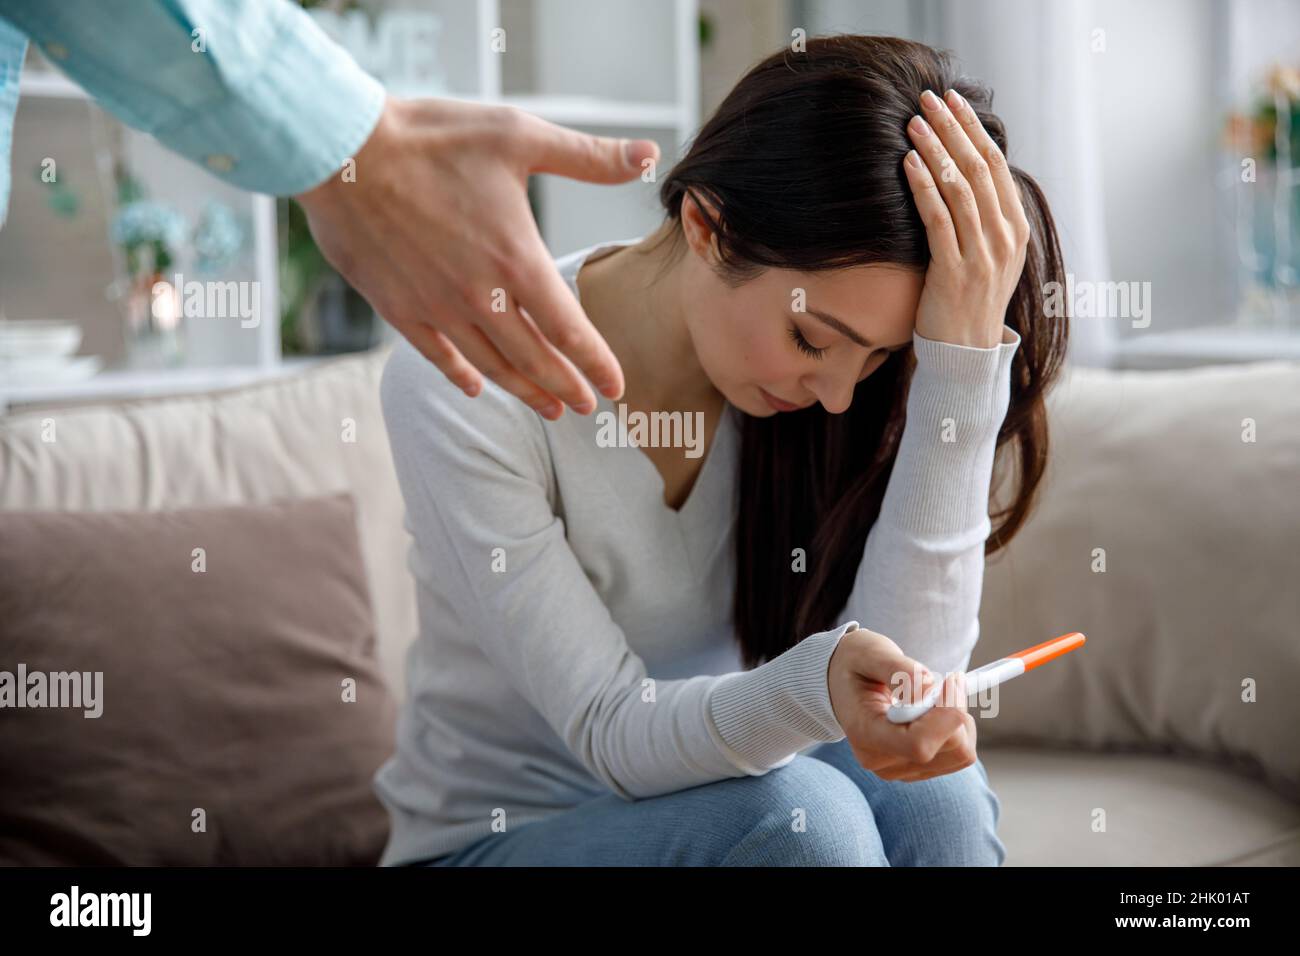 A sad young woman holds a pregnancy test in her hand. The concept of unwanted pregnancy Stock Photo